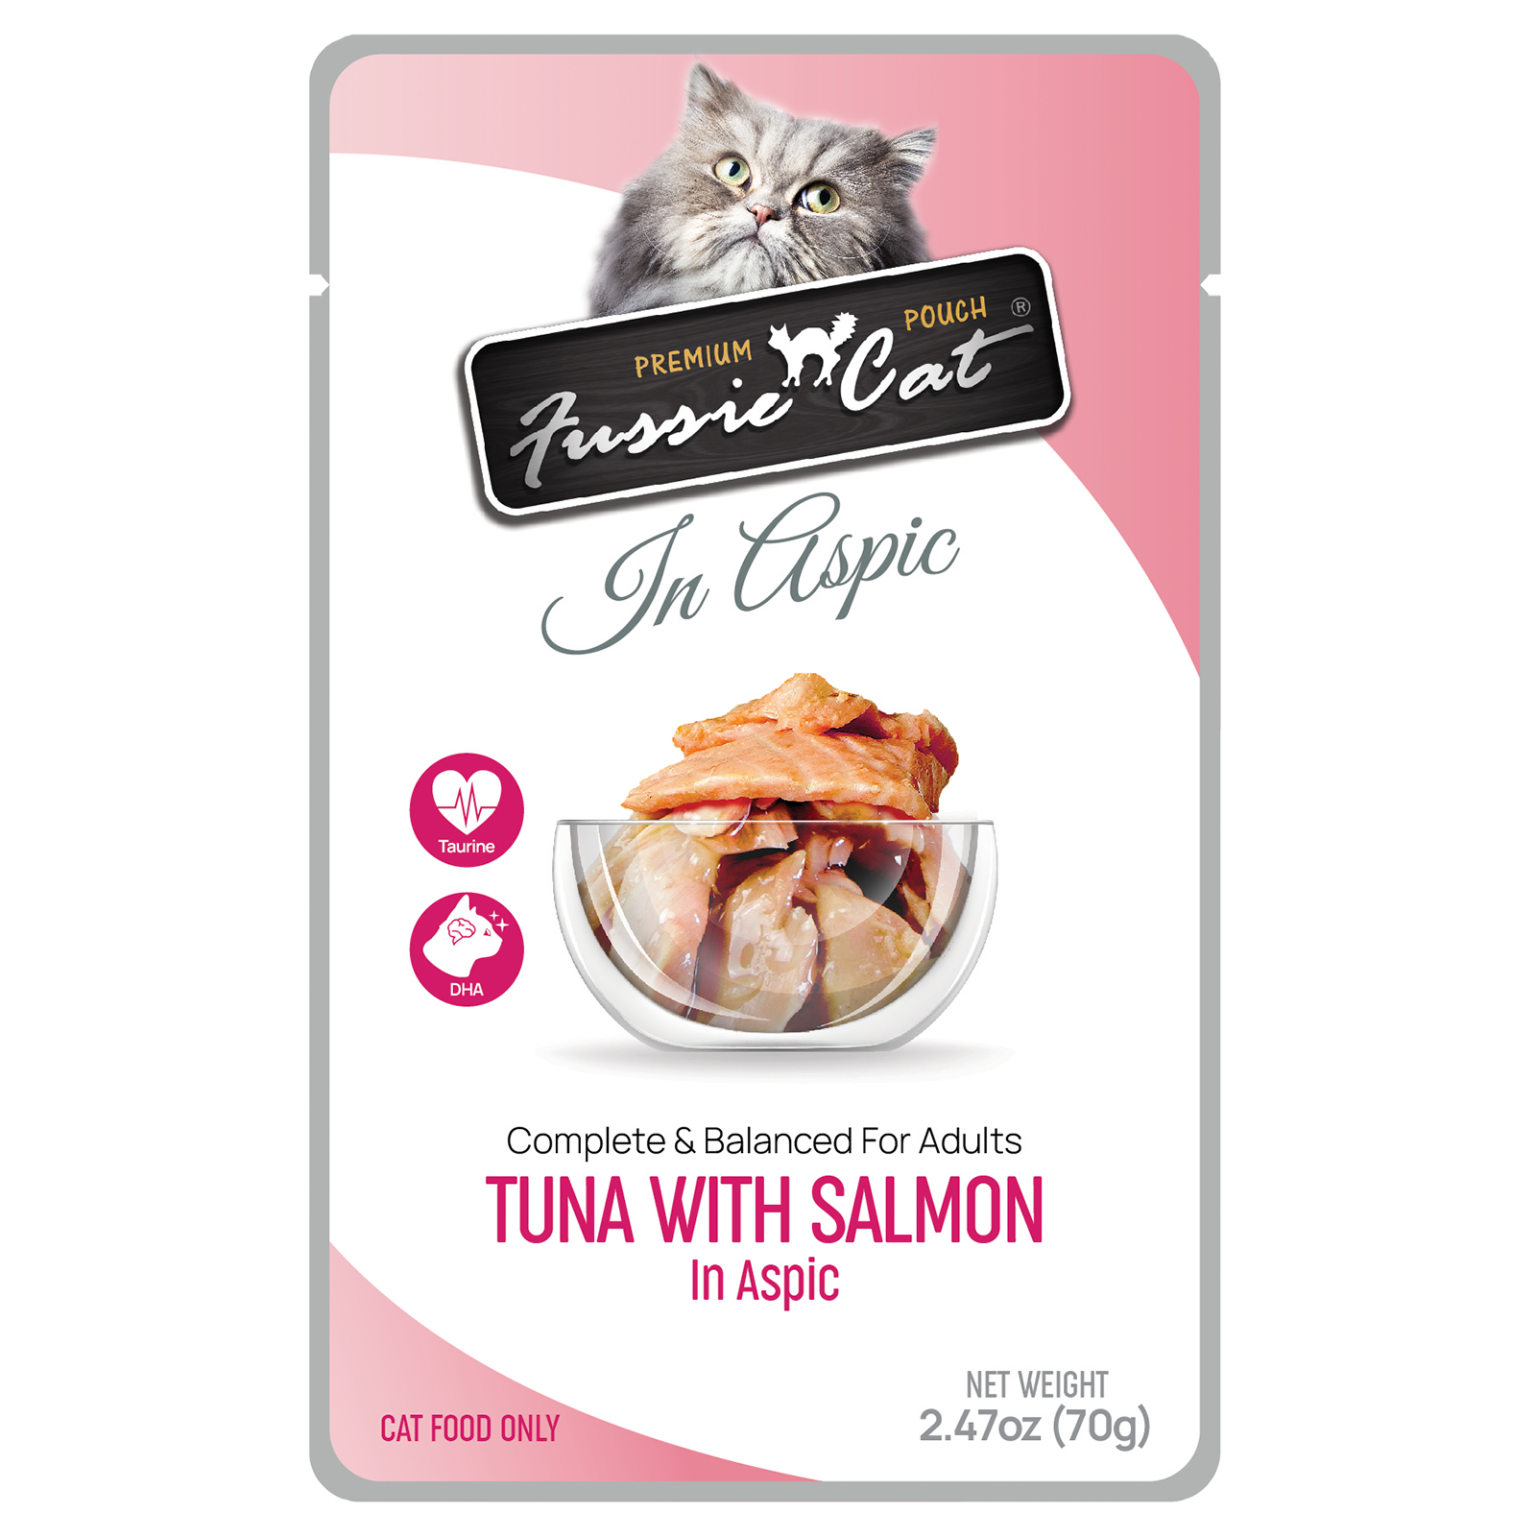 Tuna with Salmon in Aspic Pouch